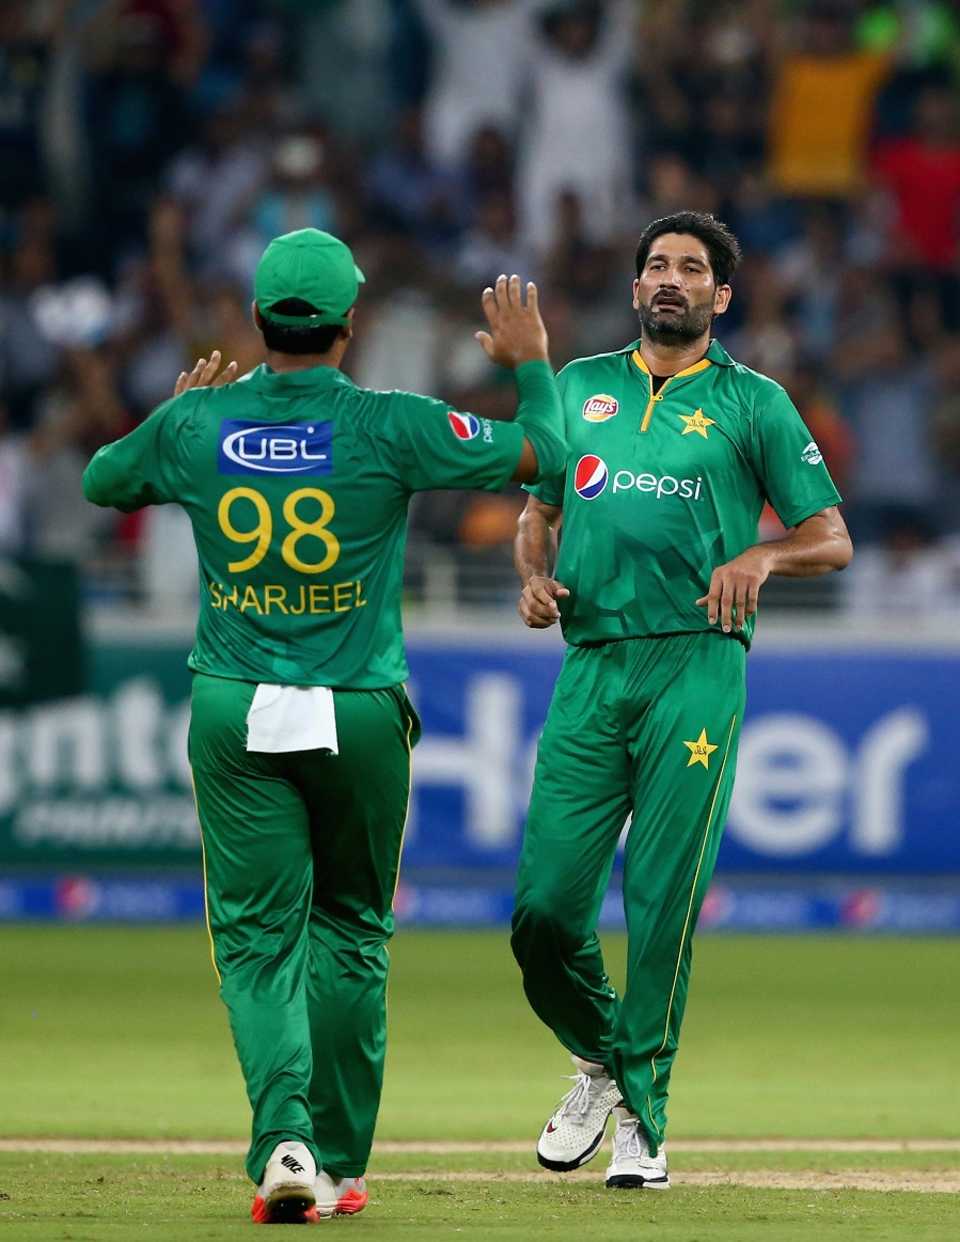 Sohail Tanvir completed 50 T20I wickets and finished with 3 for 13 in four overs